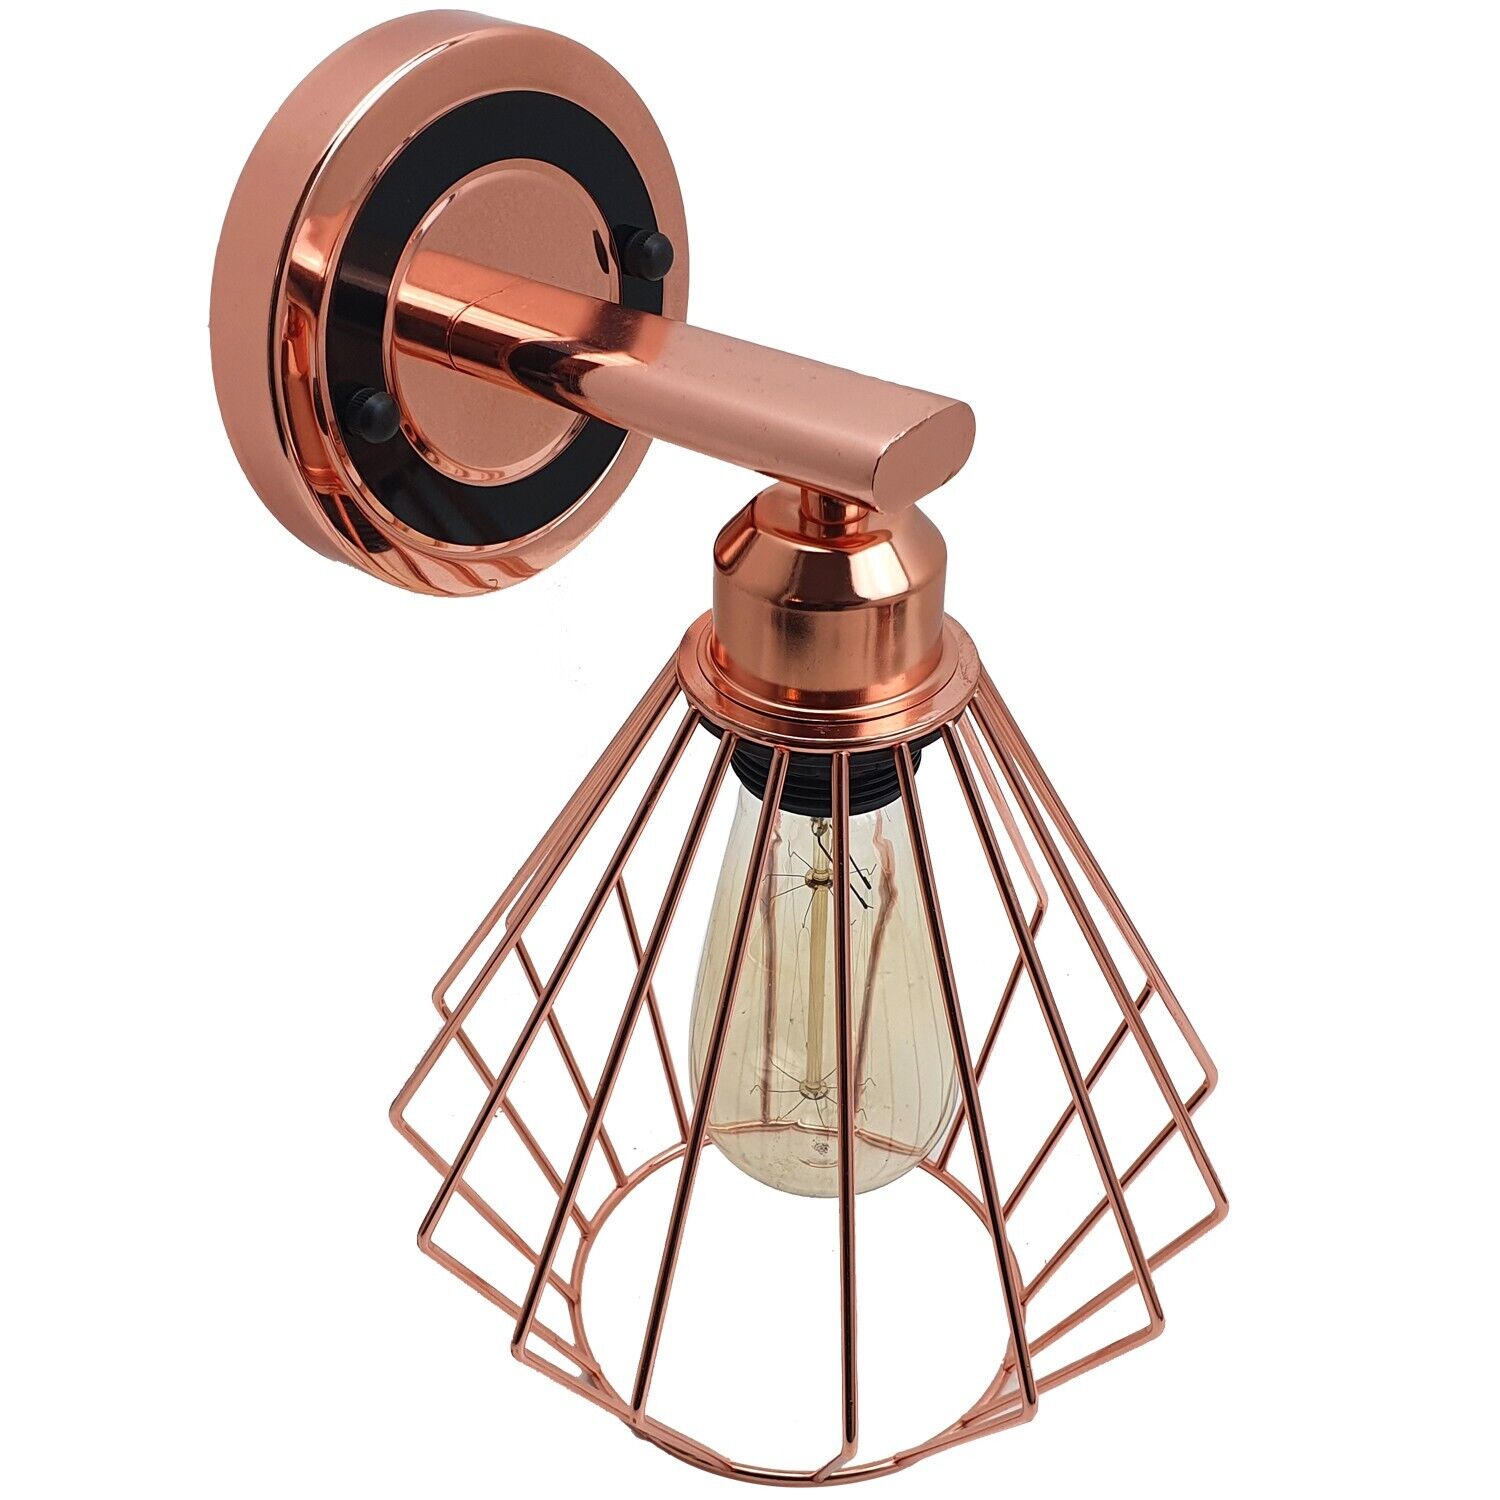 Vintage Retro Industrial Sconce Wall Light Lamp Fitting Rose Gold Fixture~4488